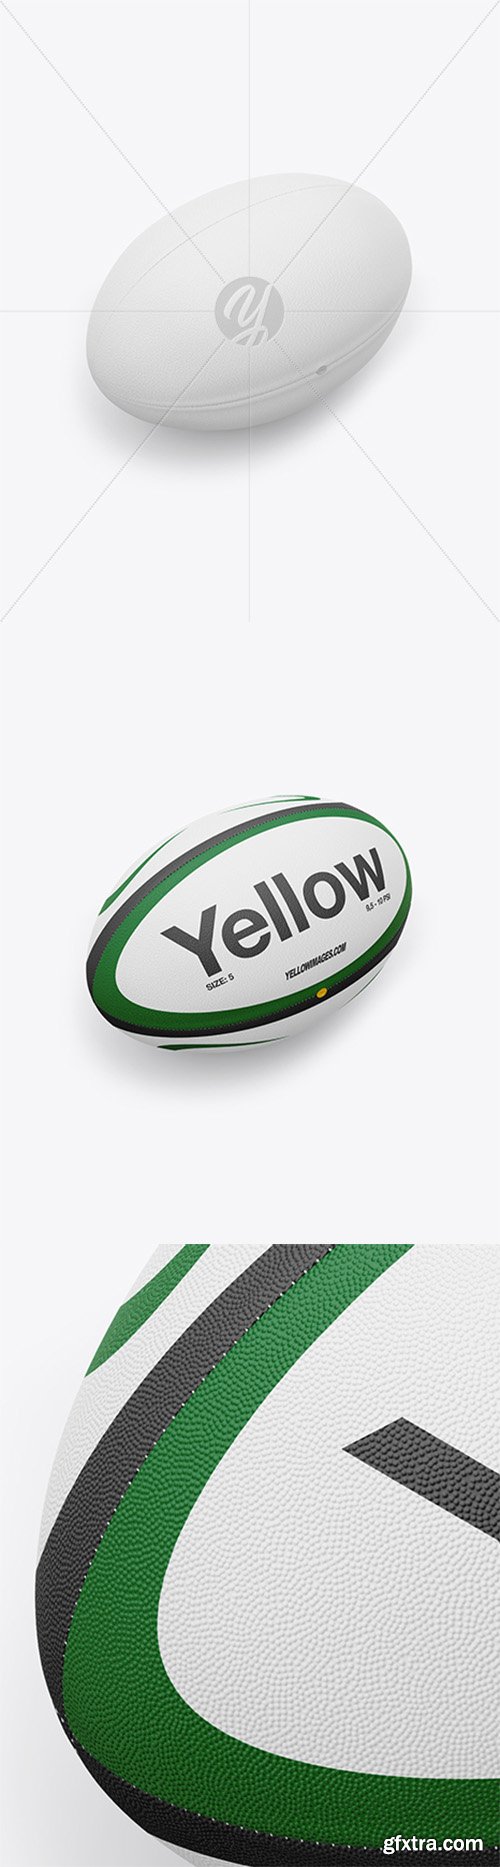 Rugby Ball Mockup - Half Side View 19804